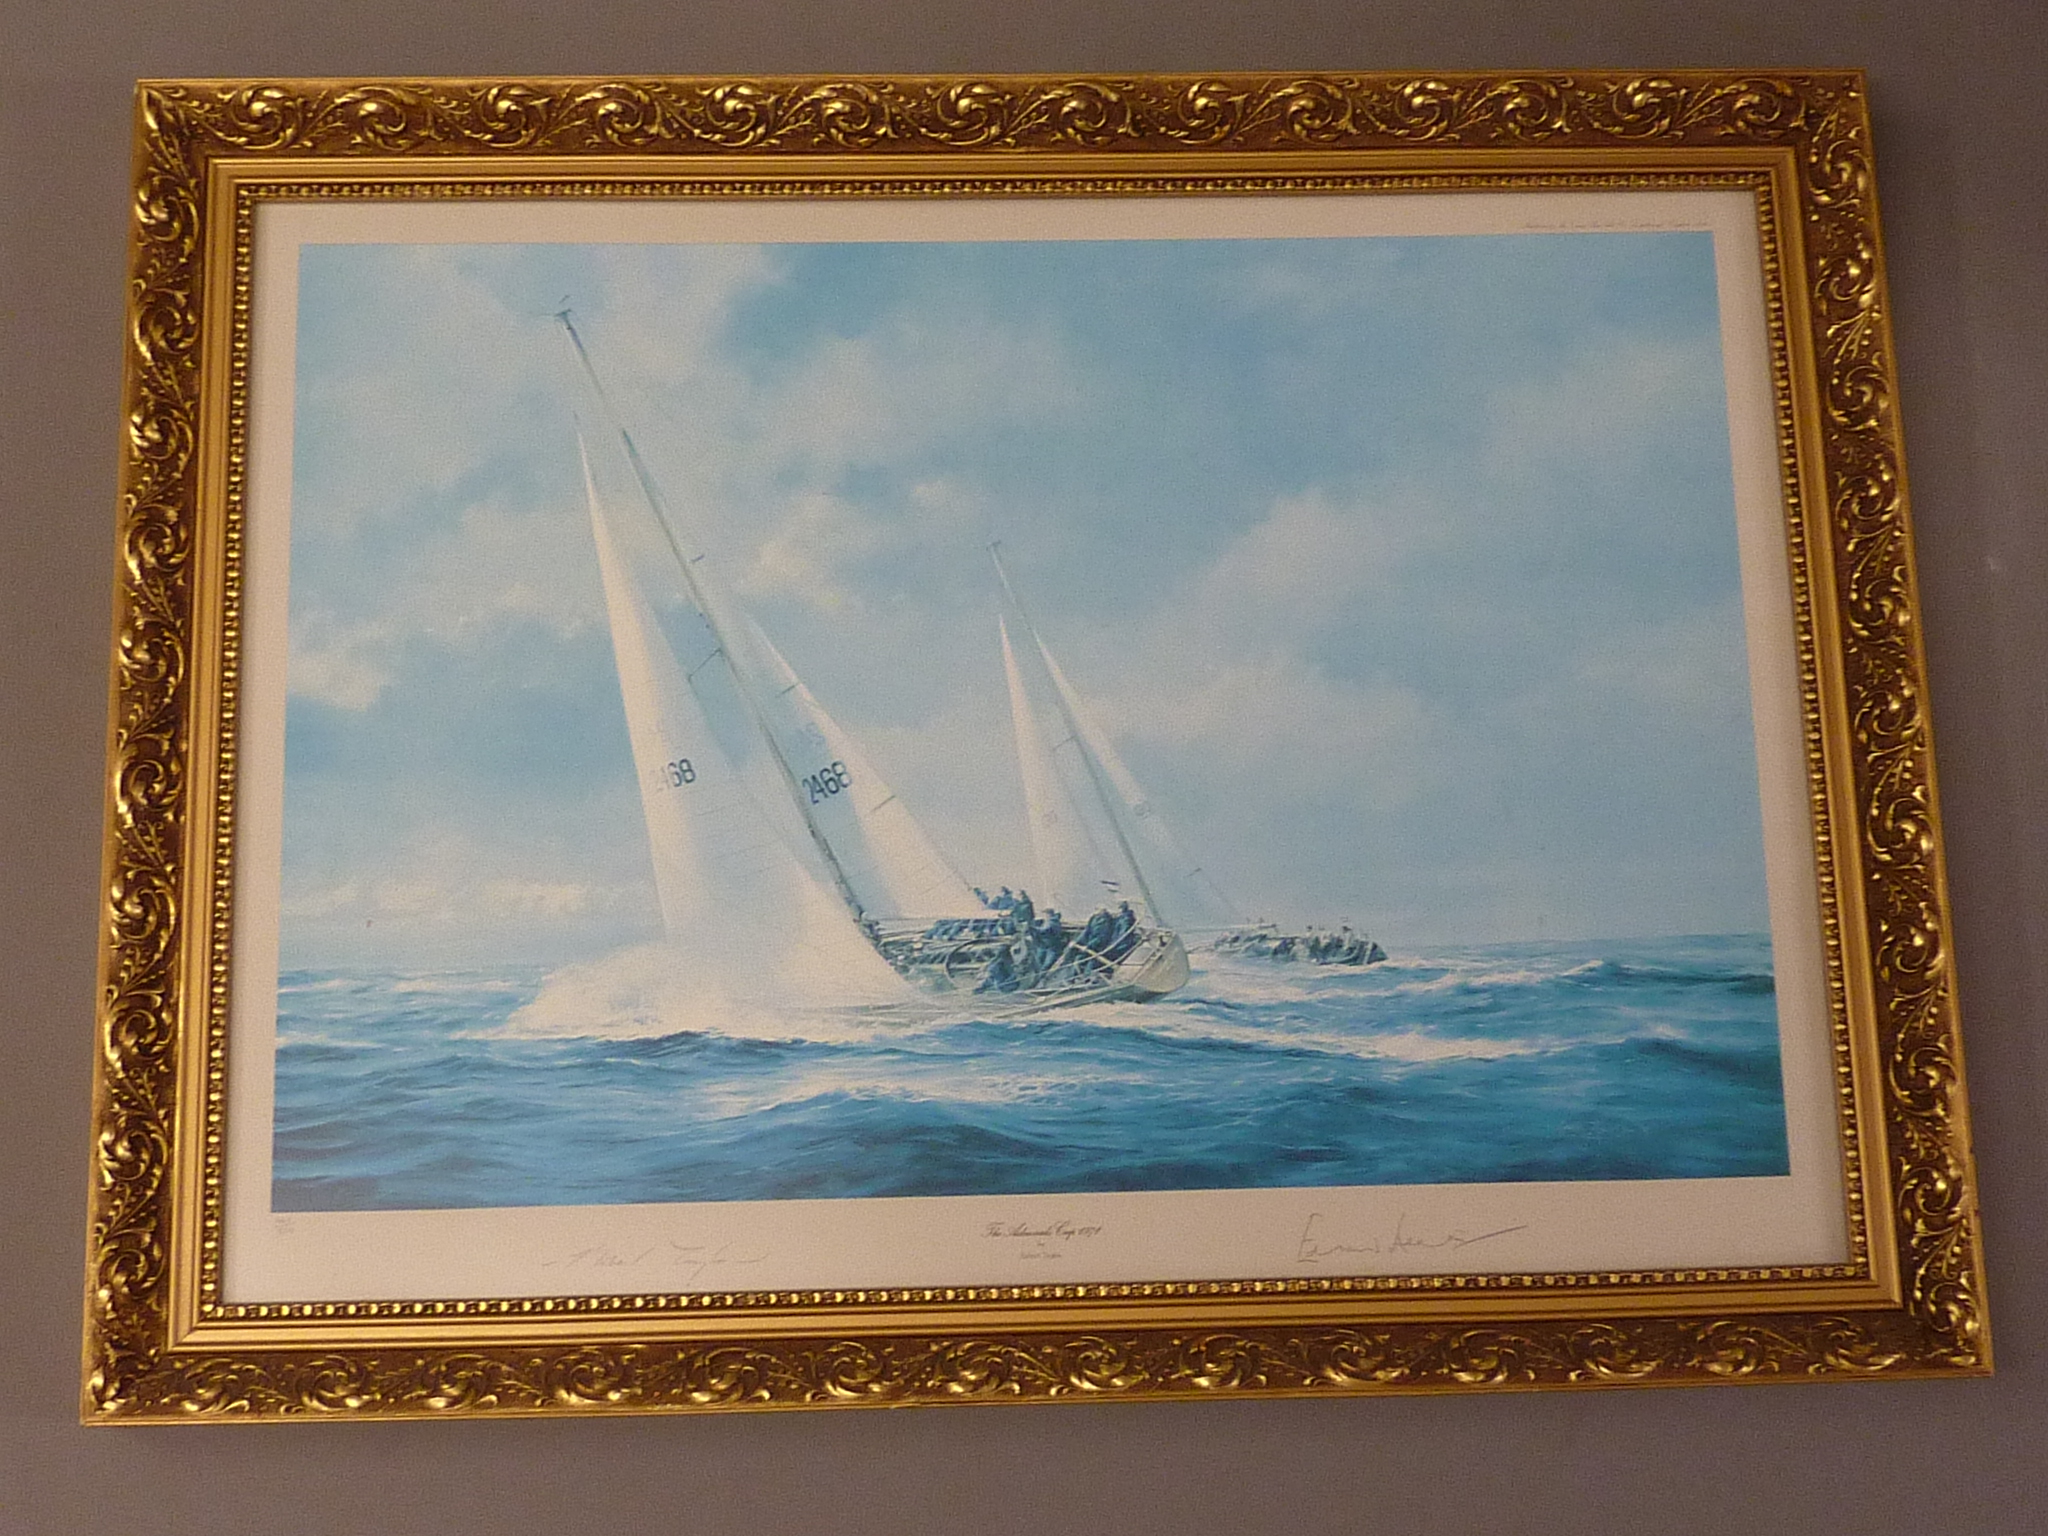 'The Admiral's Cup 1971' & 'Running Down to Hobart', pair Robert Taylor limited edition prints pub. - Image 2 of 2